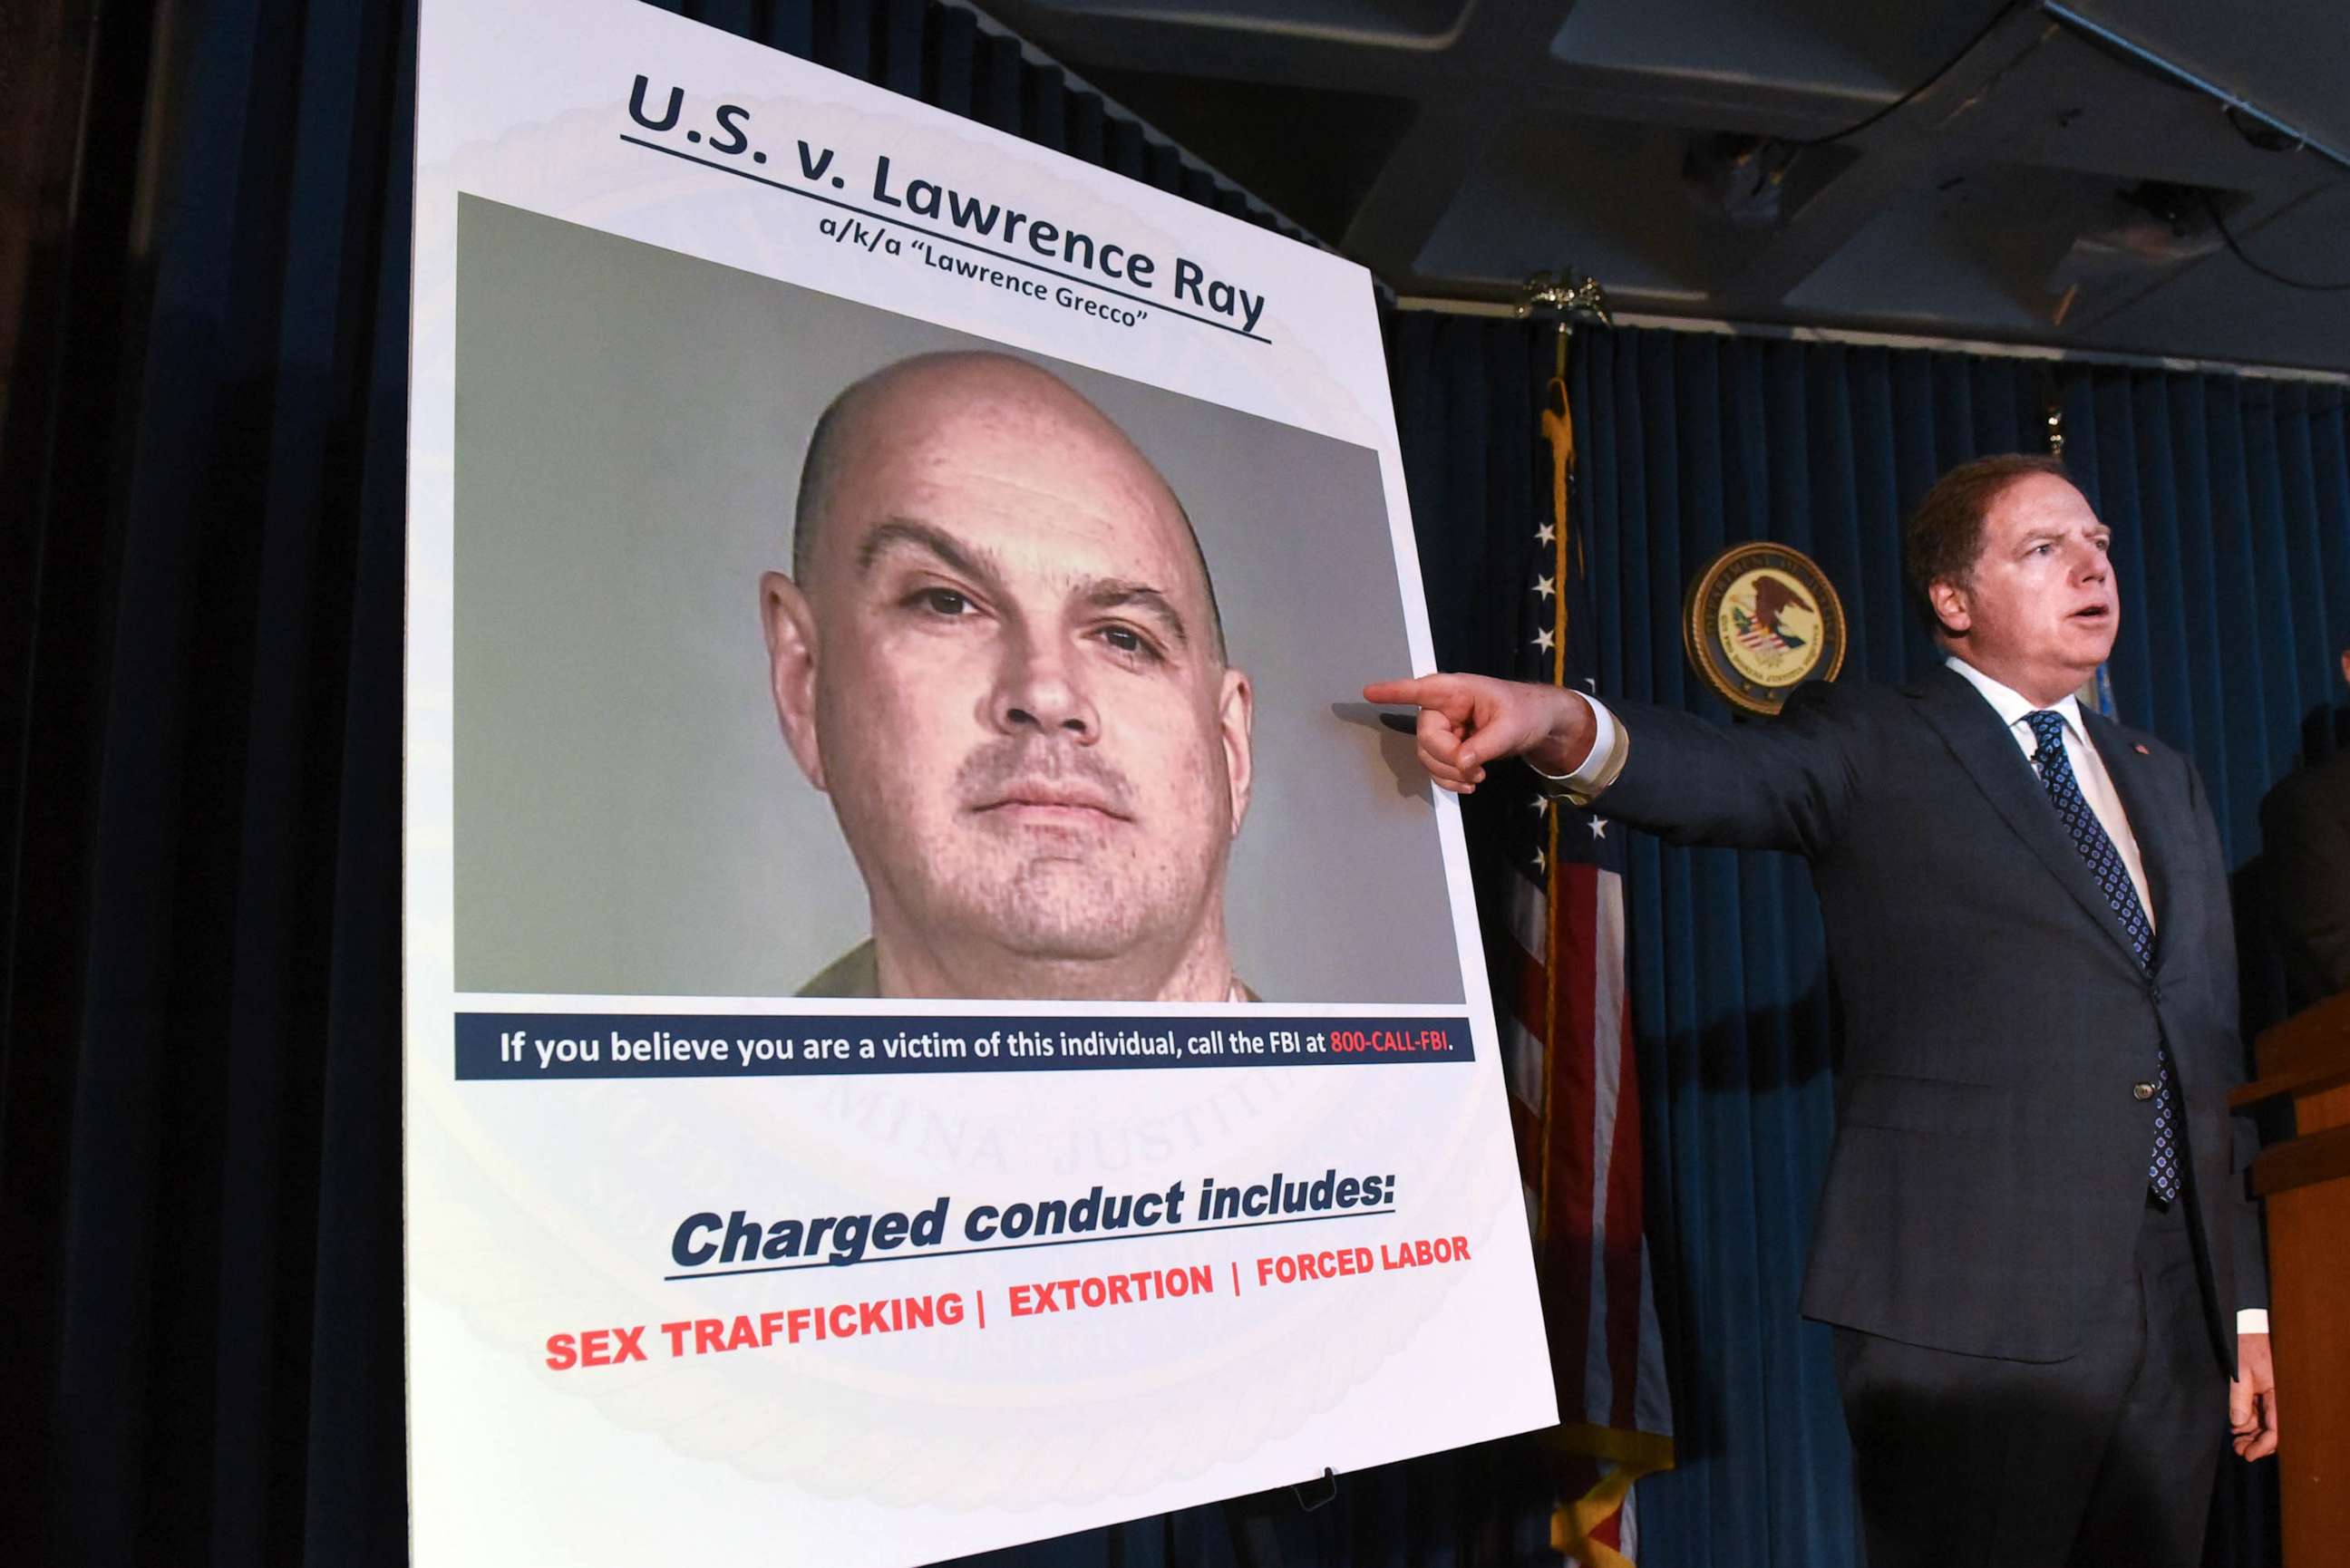 PHOTO: FILE - United States Attorney for the Southern District of New York, Geoffrey Berman announces the indictment against Lawrence Ray aka "Lawrence Grecco", Feb. 11, 2020 in New York City.